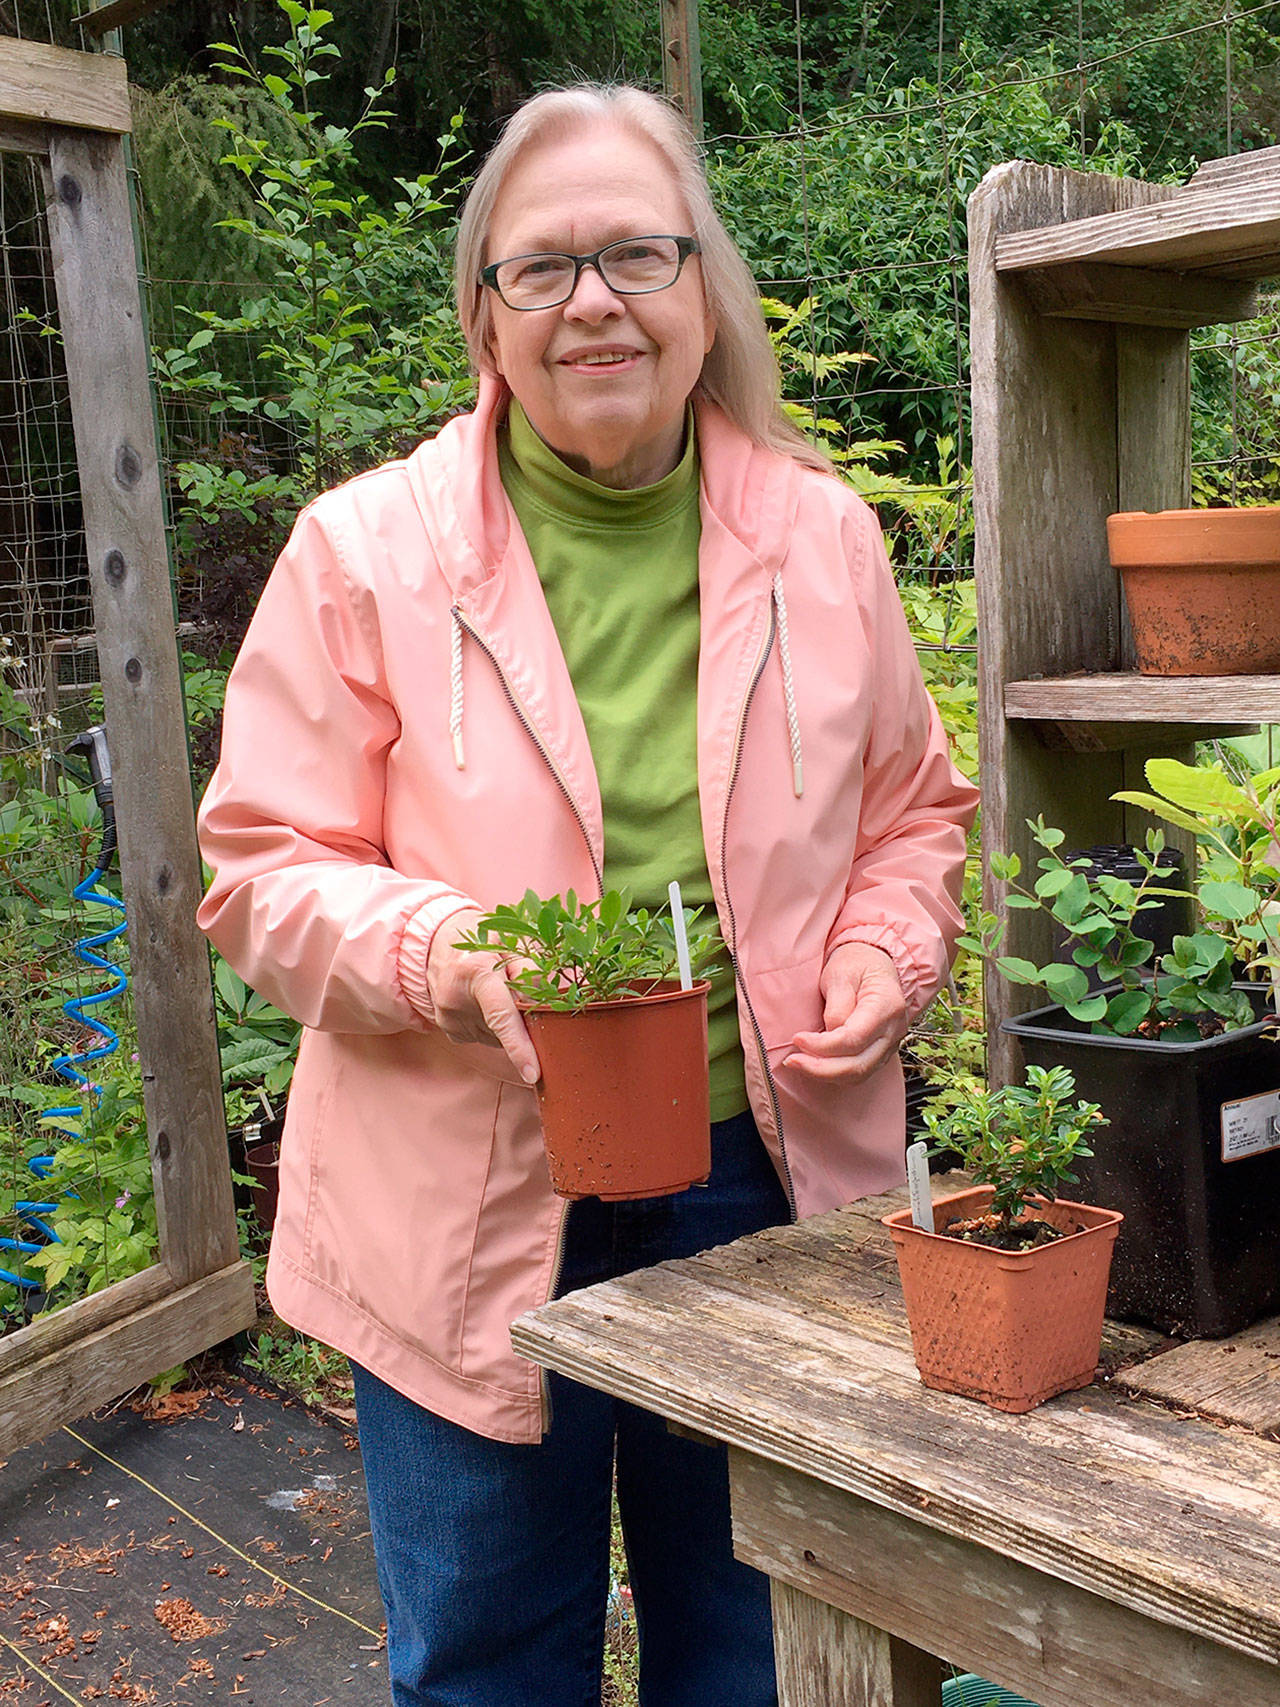 Rosalie Preble will present “Propagation: New Plants from Cuttings” at noon Thursday.